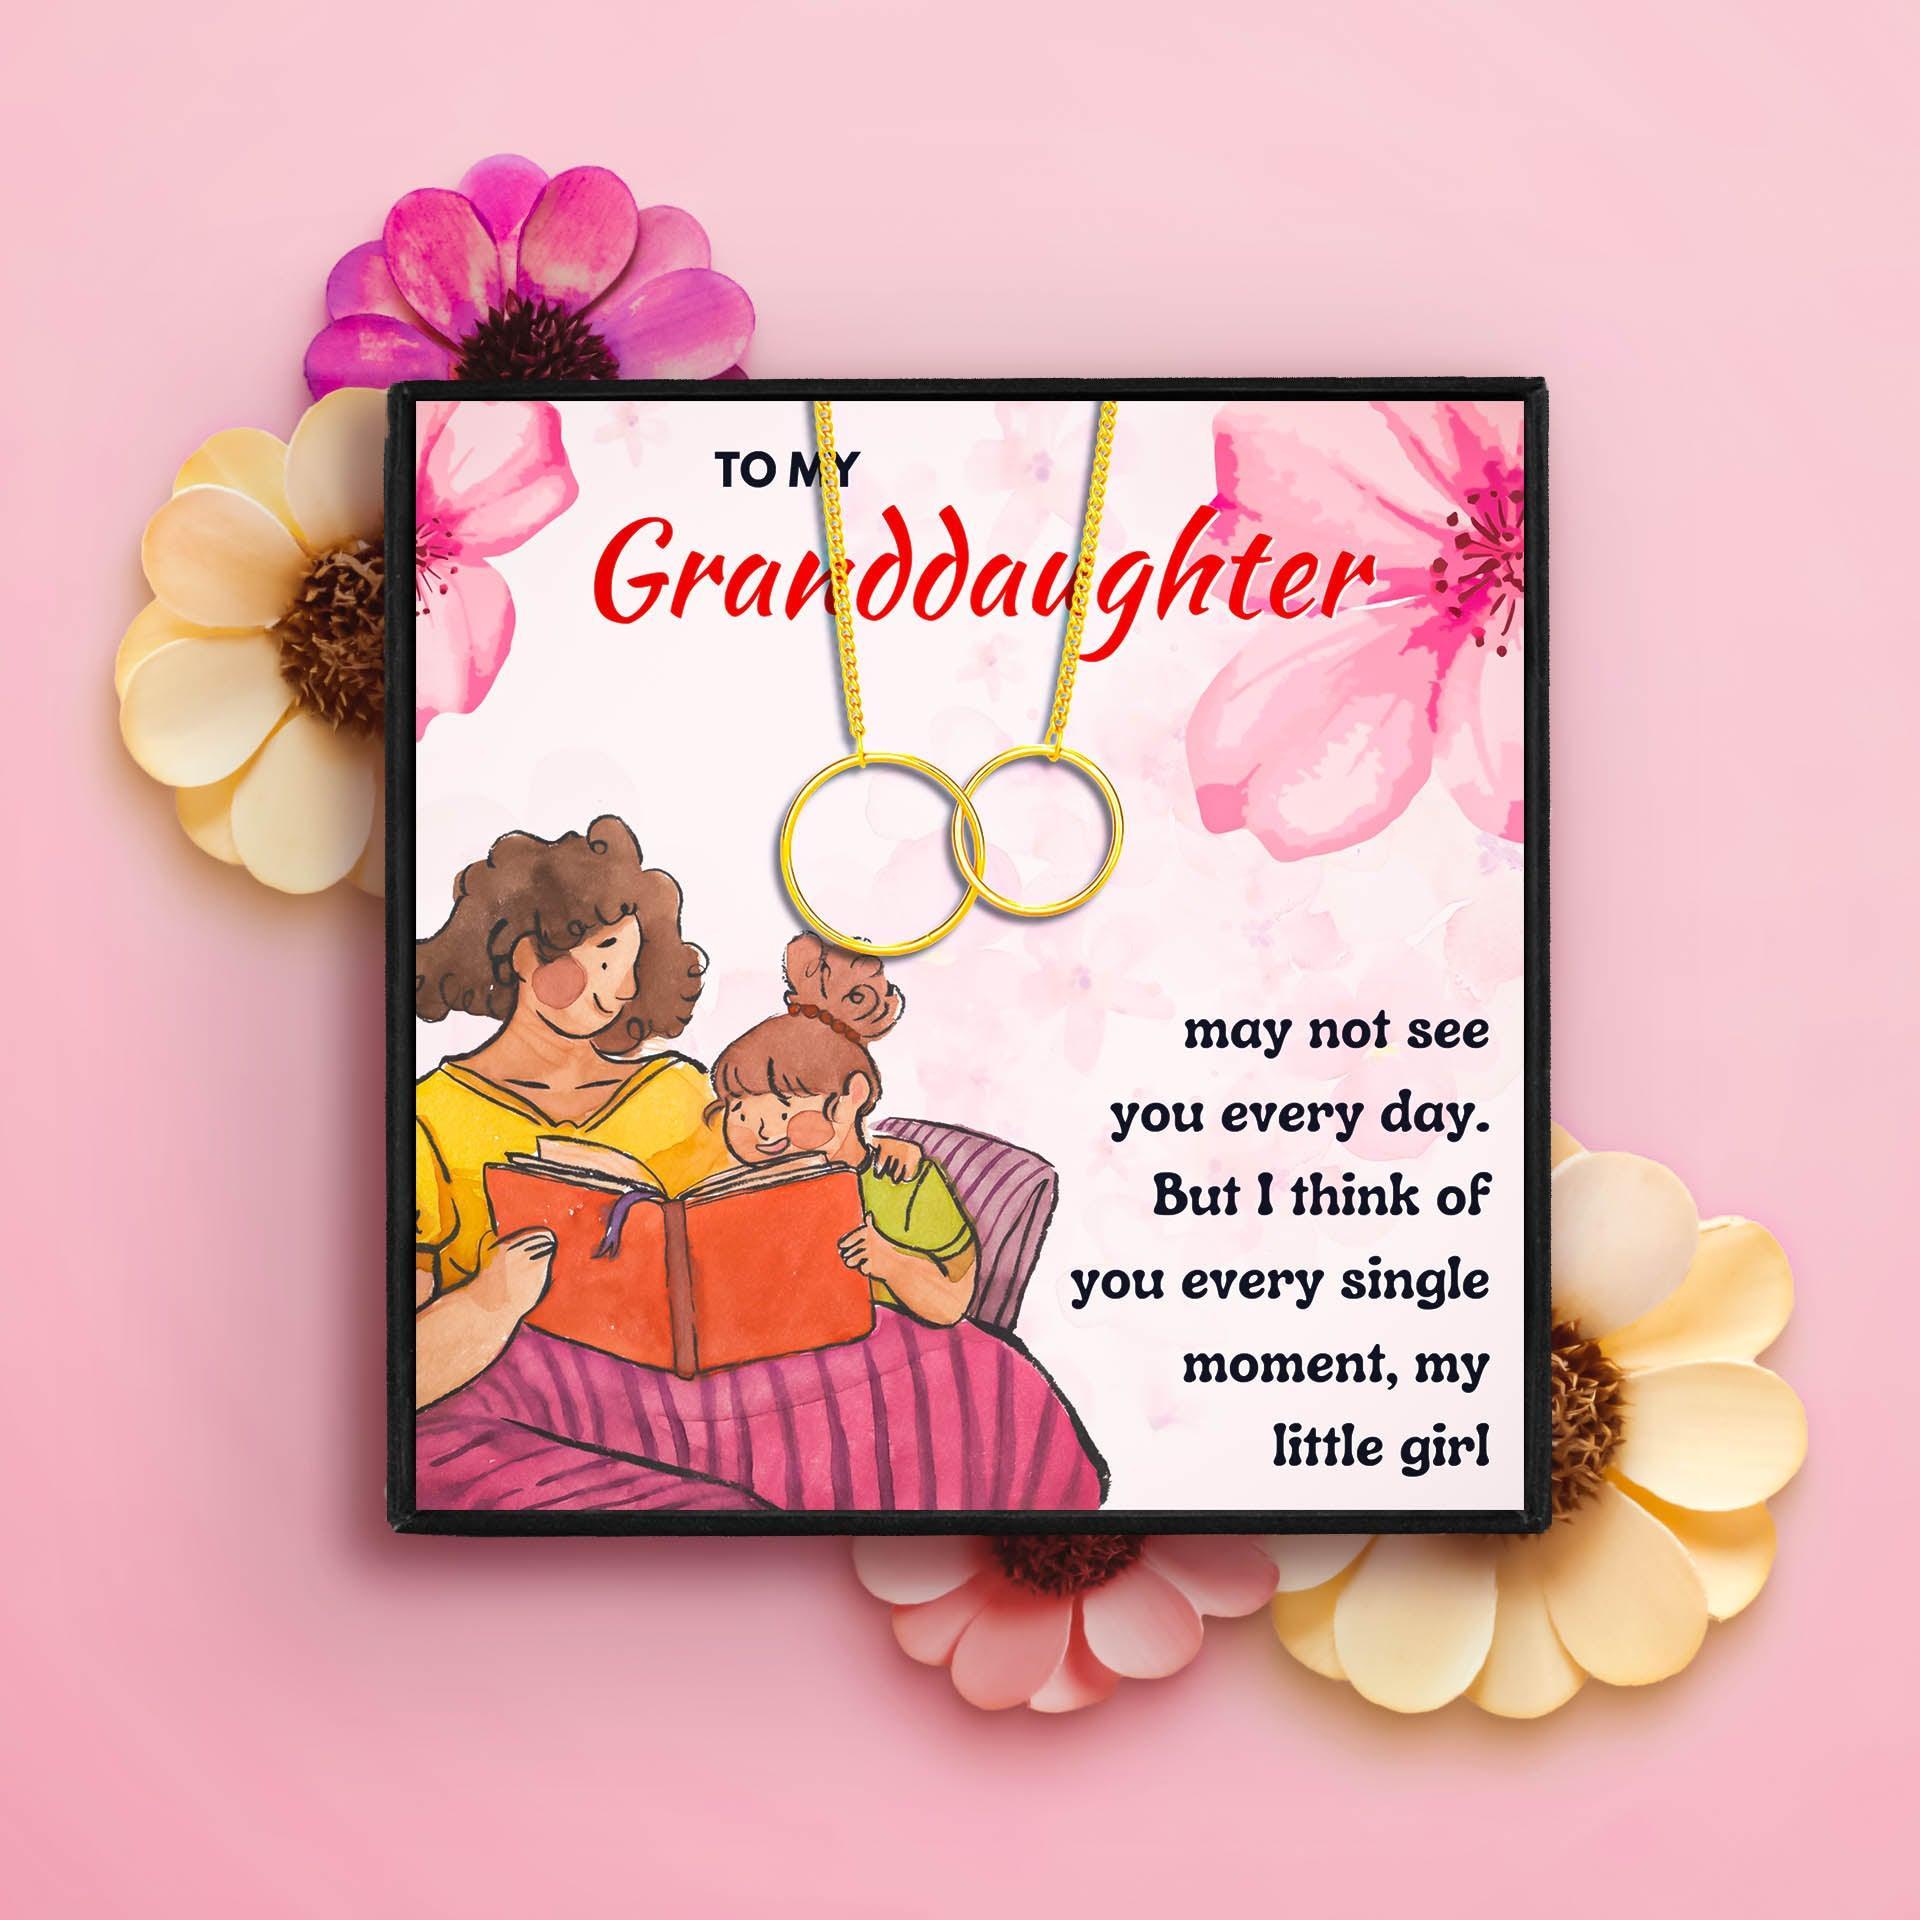 To My Granddaughter Double Heart Necklace Set in 2023 | To My Granddaughter Double Heart Necklace Set - undefined | granddaughter gifts from nana, Granddaughter Necklace, granddaughter necklace from grandma, grandma granddaughter necklace, grandmother granddaughter gifts | From Hunny Life | hunnylife.com